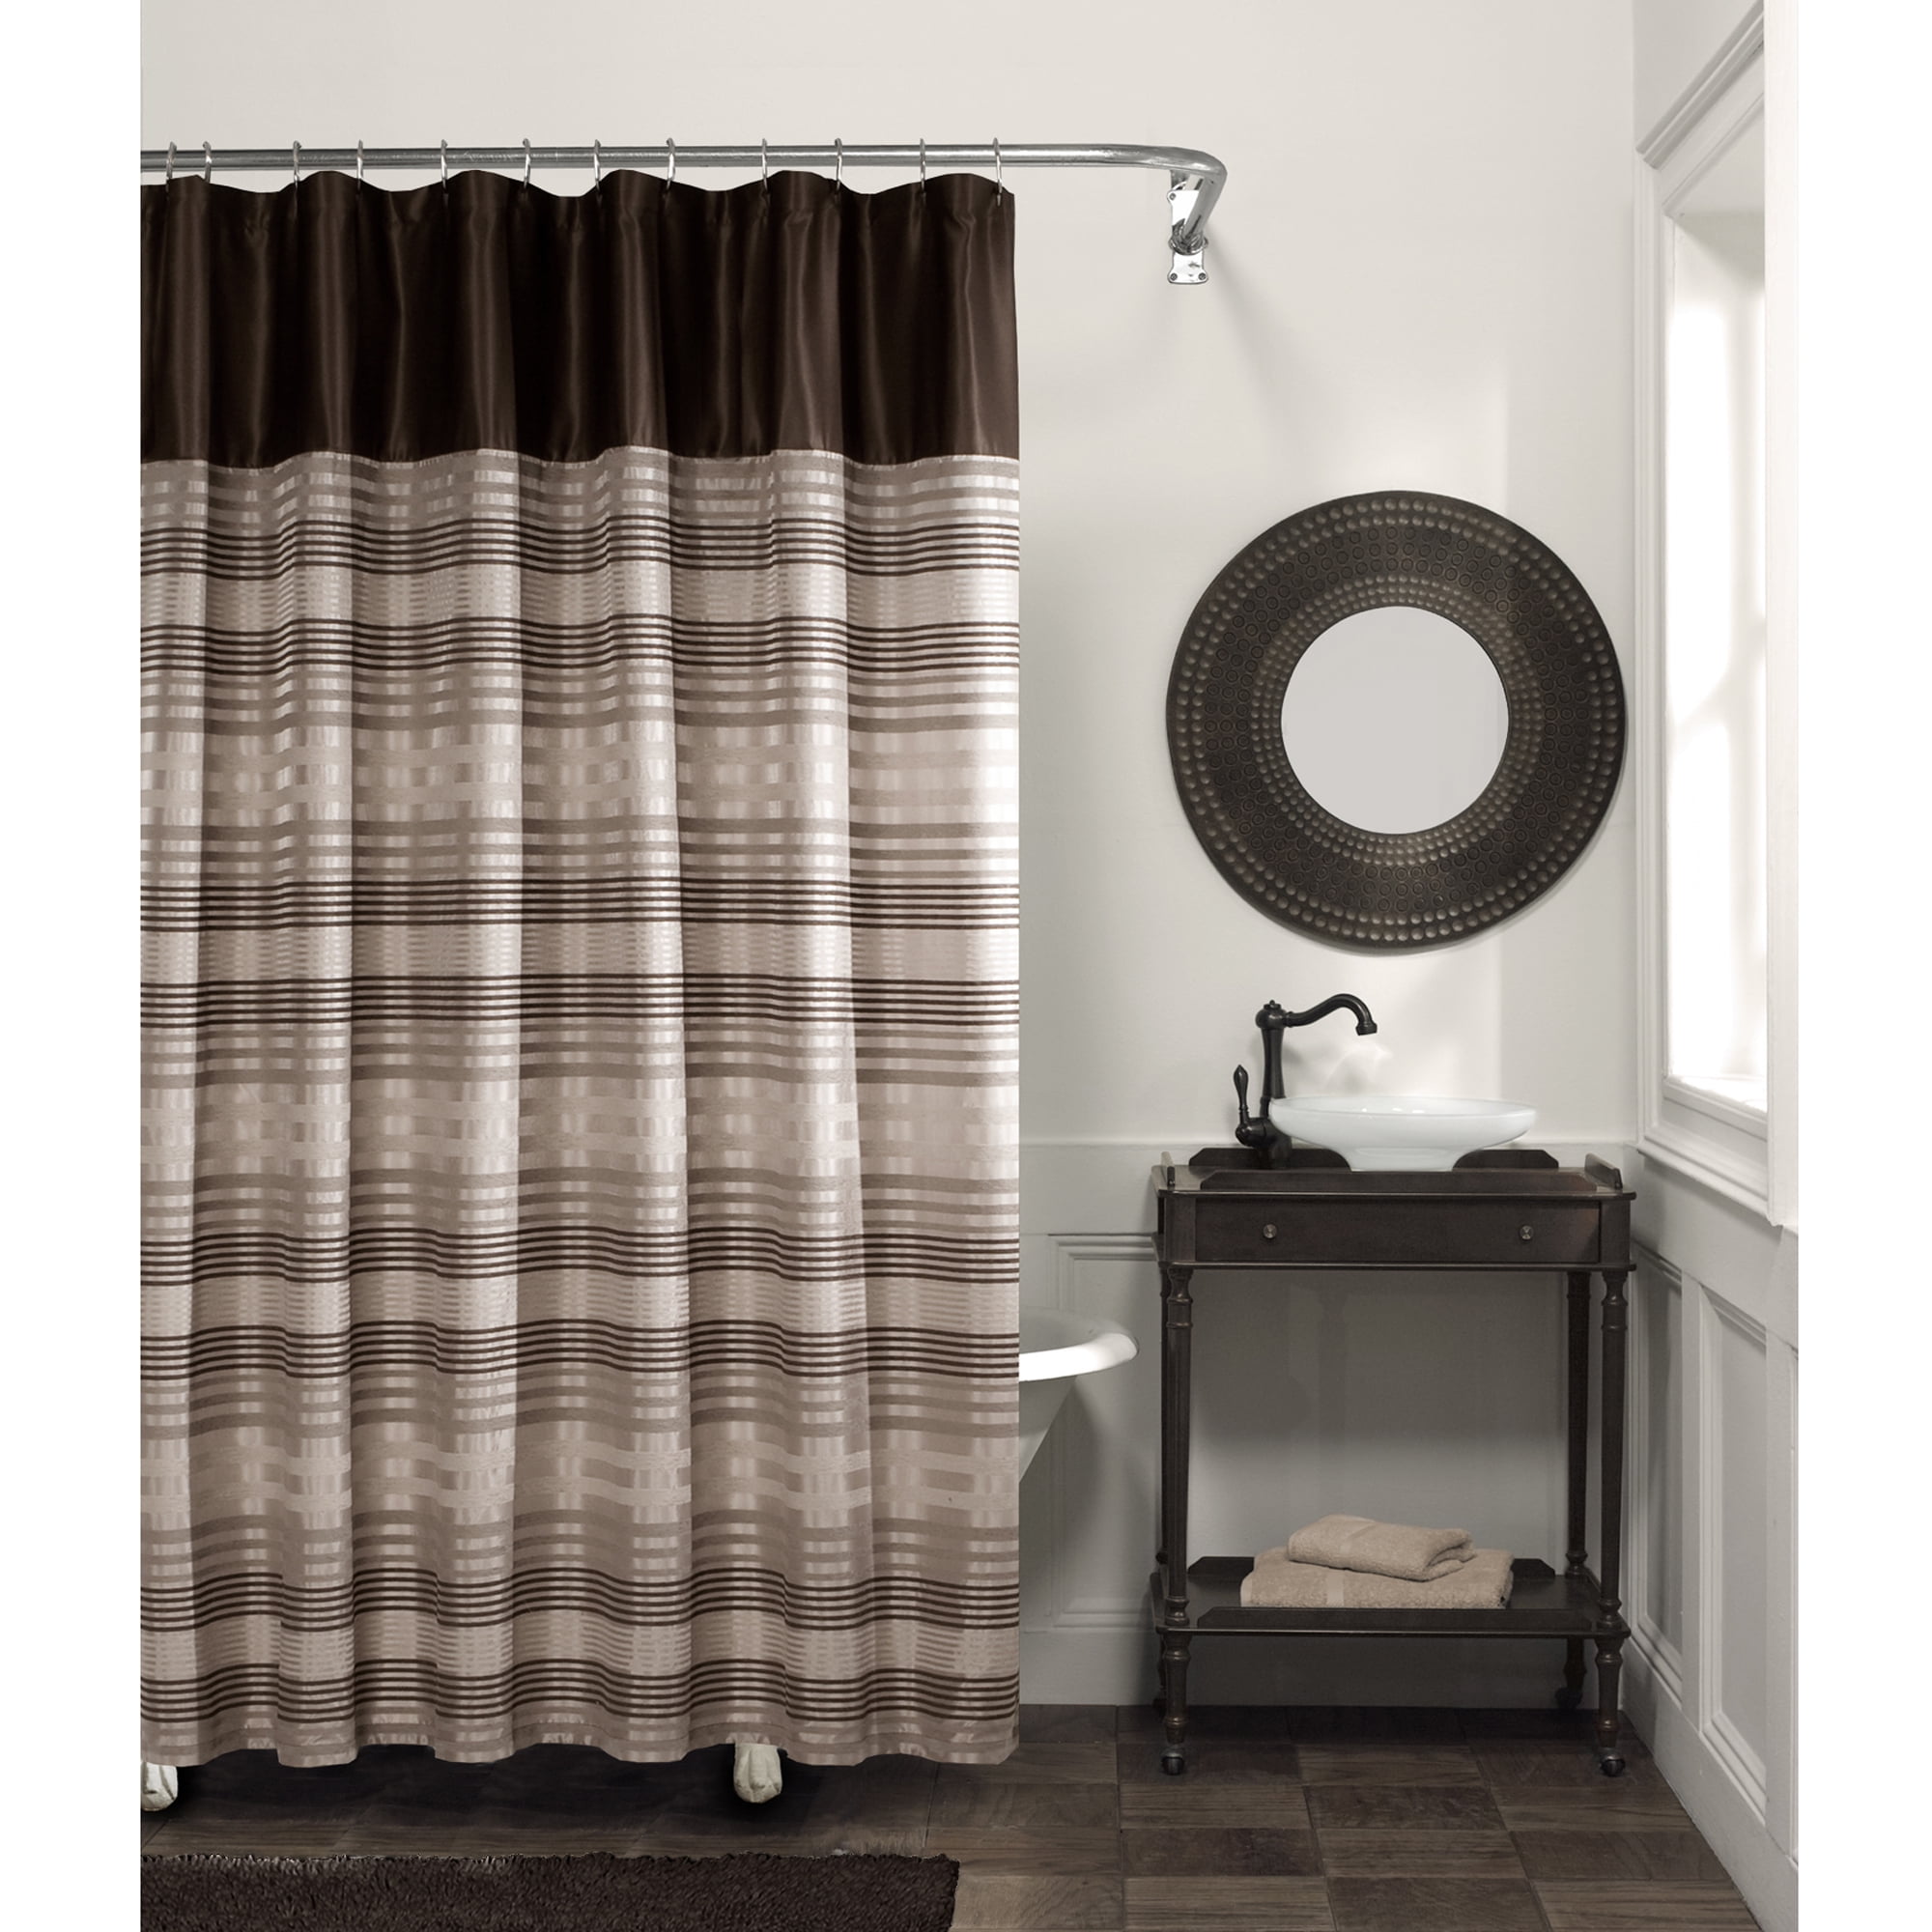 Mdesign Hotel Quality Polyester/Cotton Blend Fabric Shower Curtain With Waffle W 